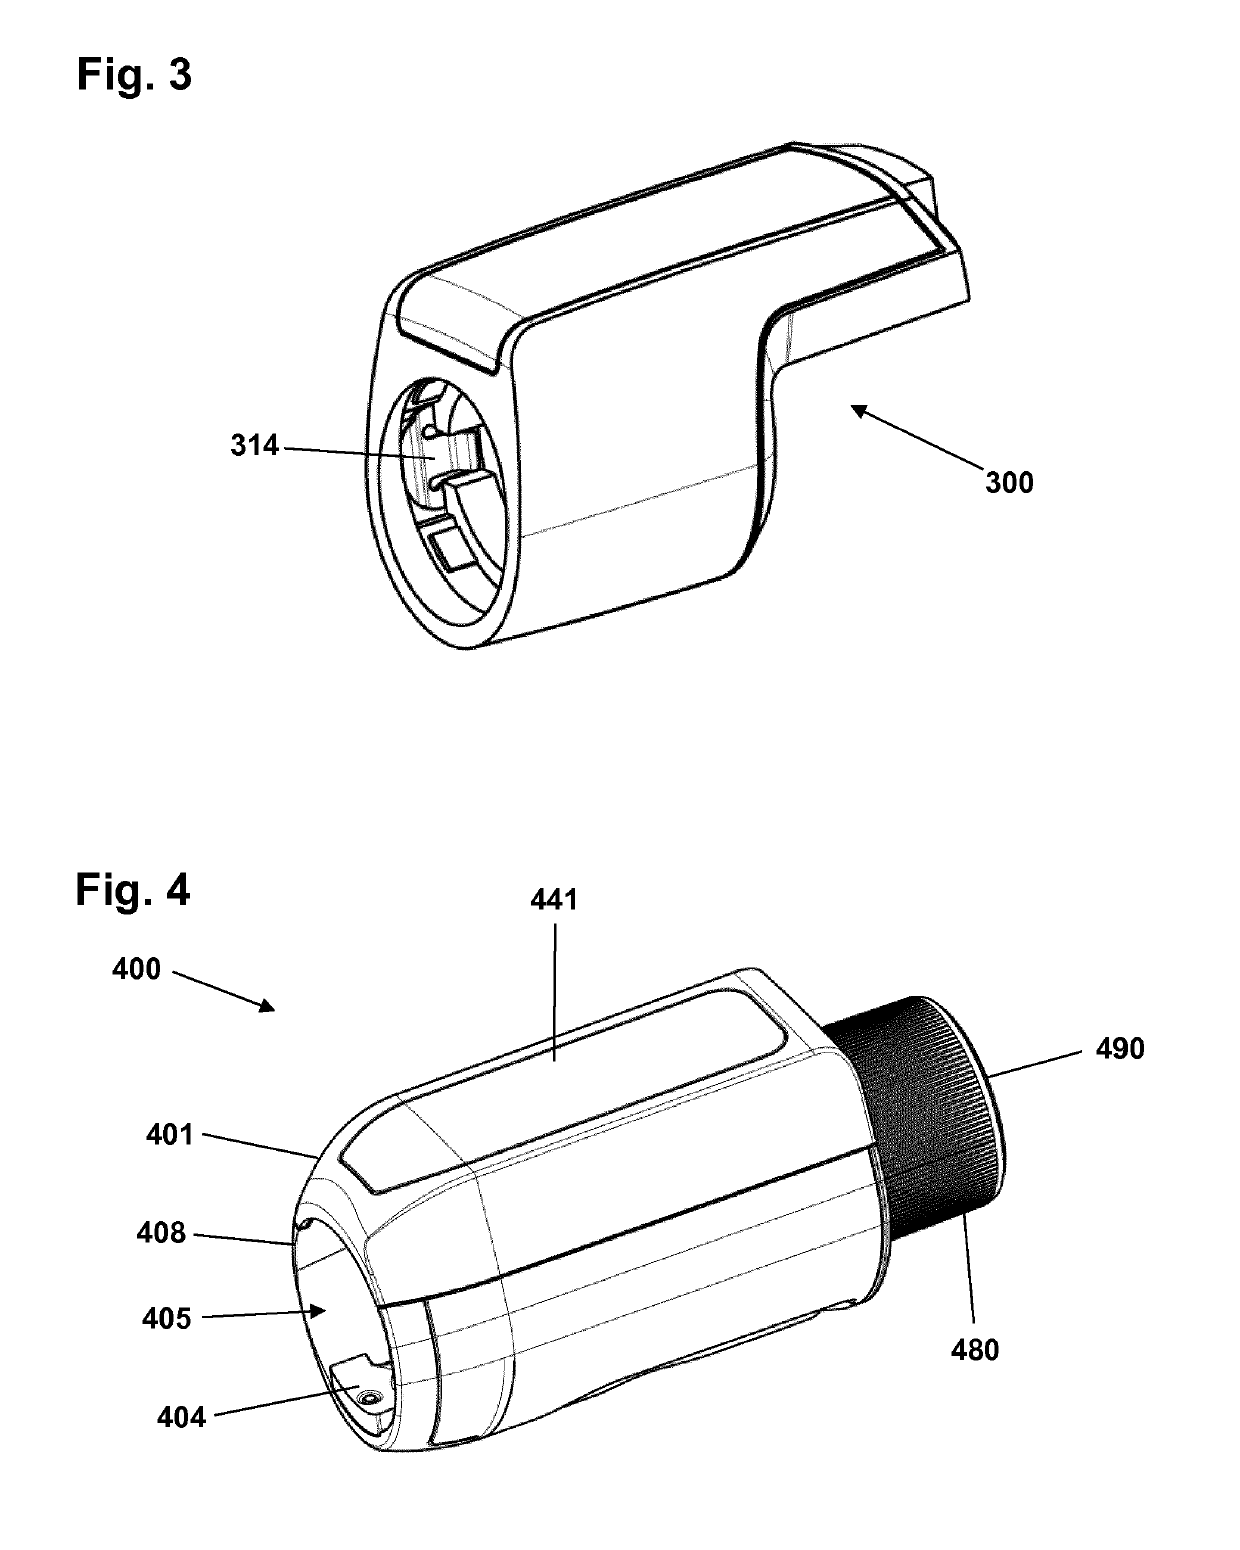 Accessory device with pairing feature